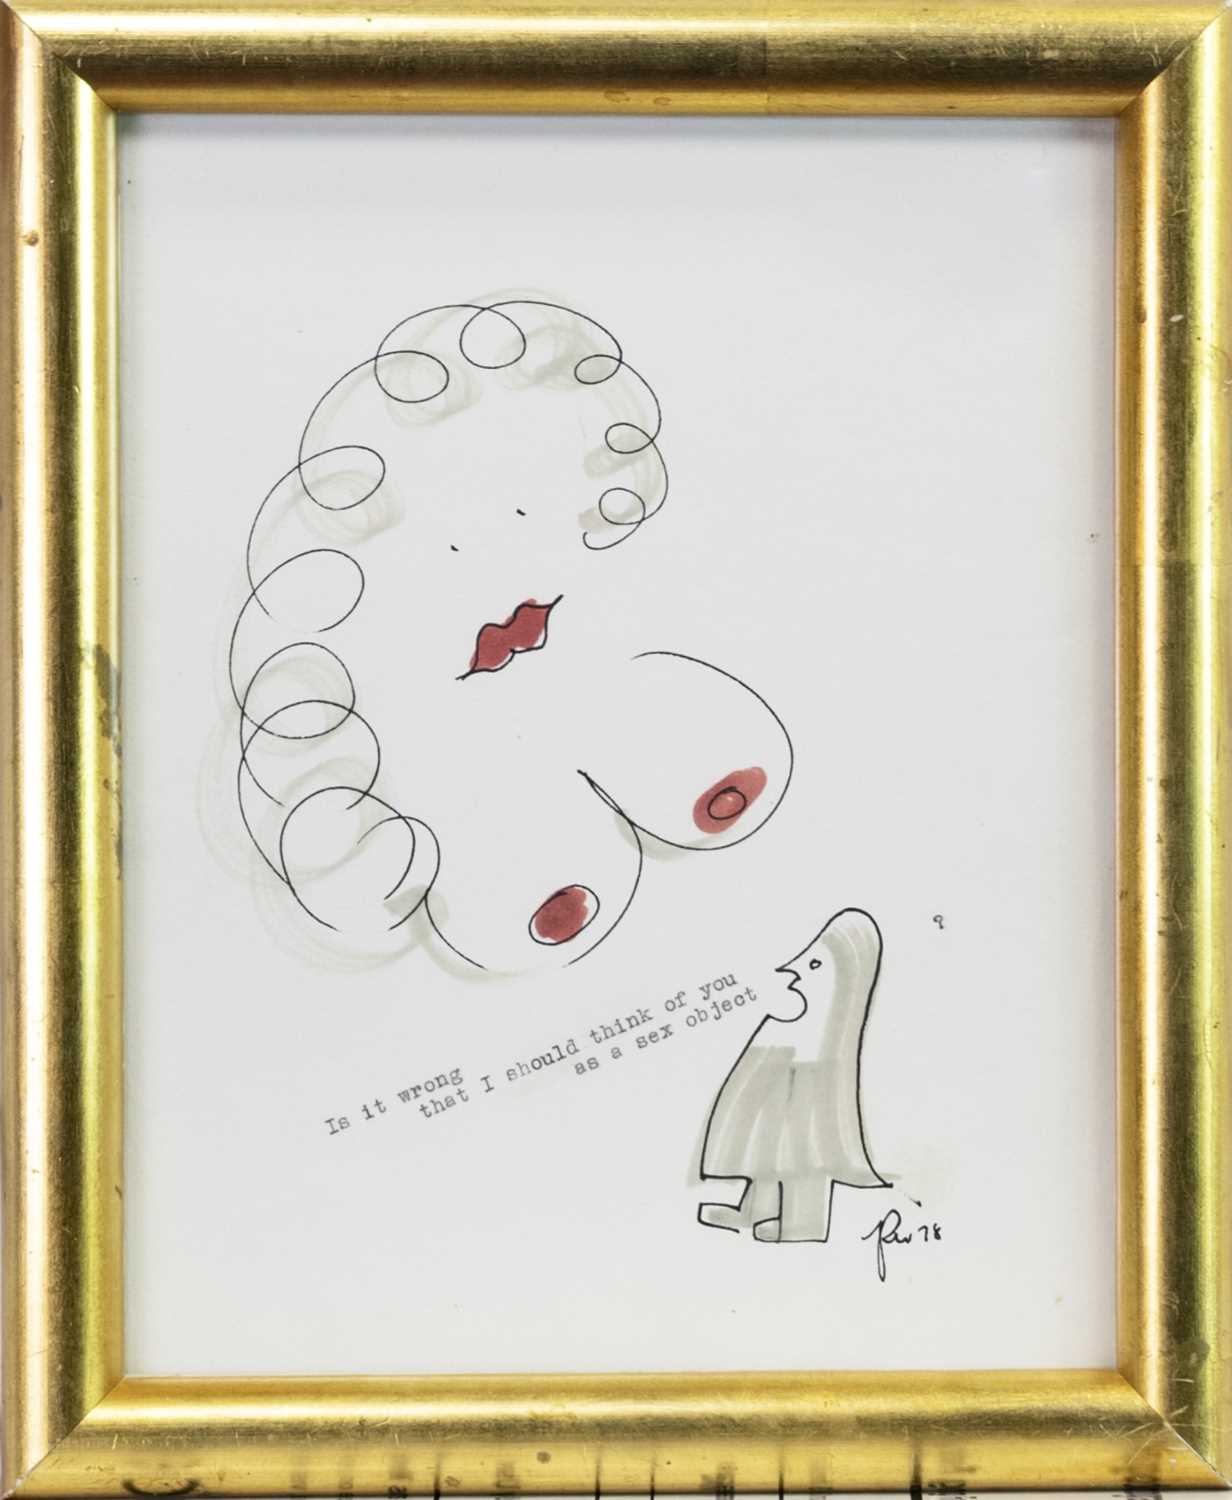 Lot 603 - IS IT WRONG THAT I SHOULD THINK OF YOU AS A SEX OBJECT?, AN INK SKETCH BY GEORGE WYLLIE